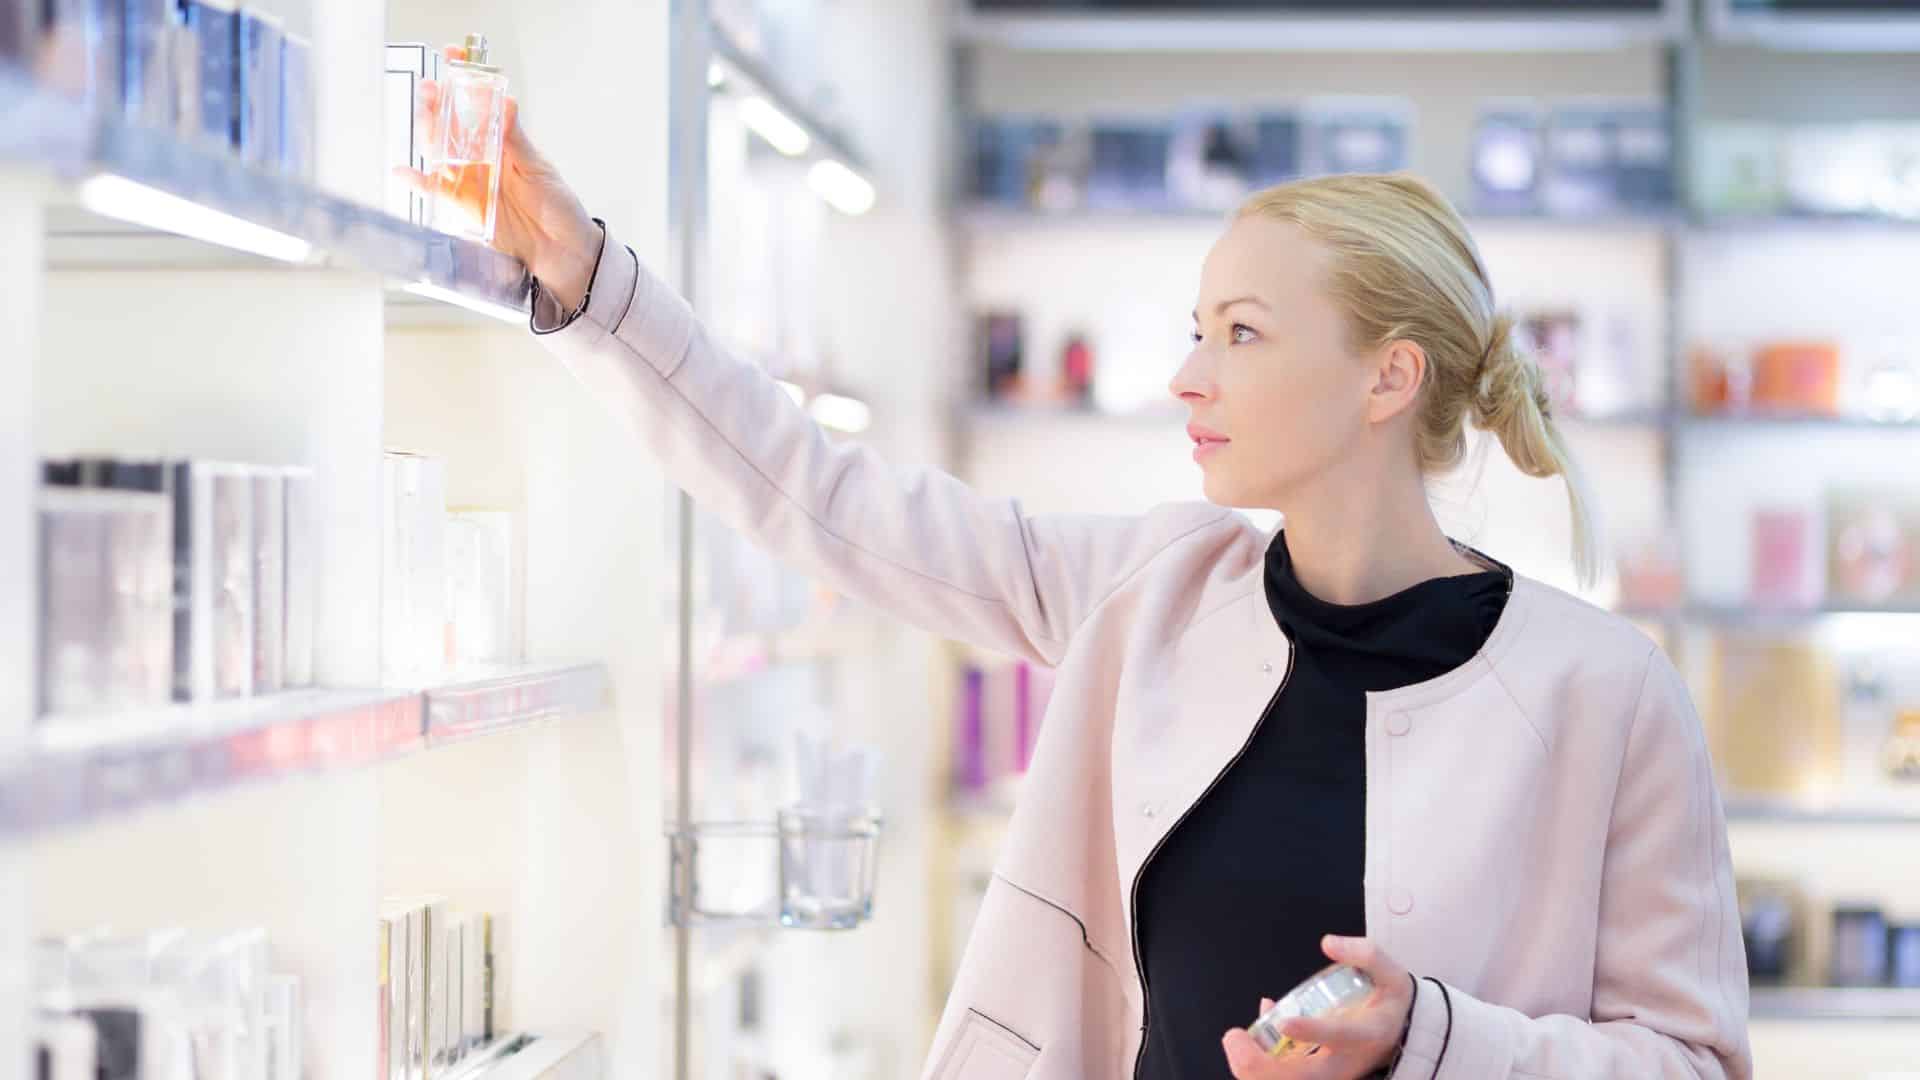 Blonde women shopping in an ecommerce store